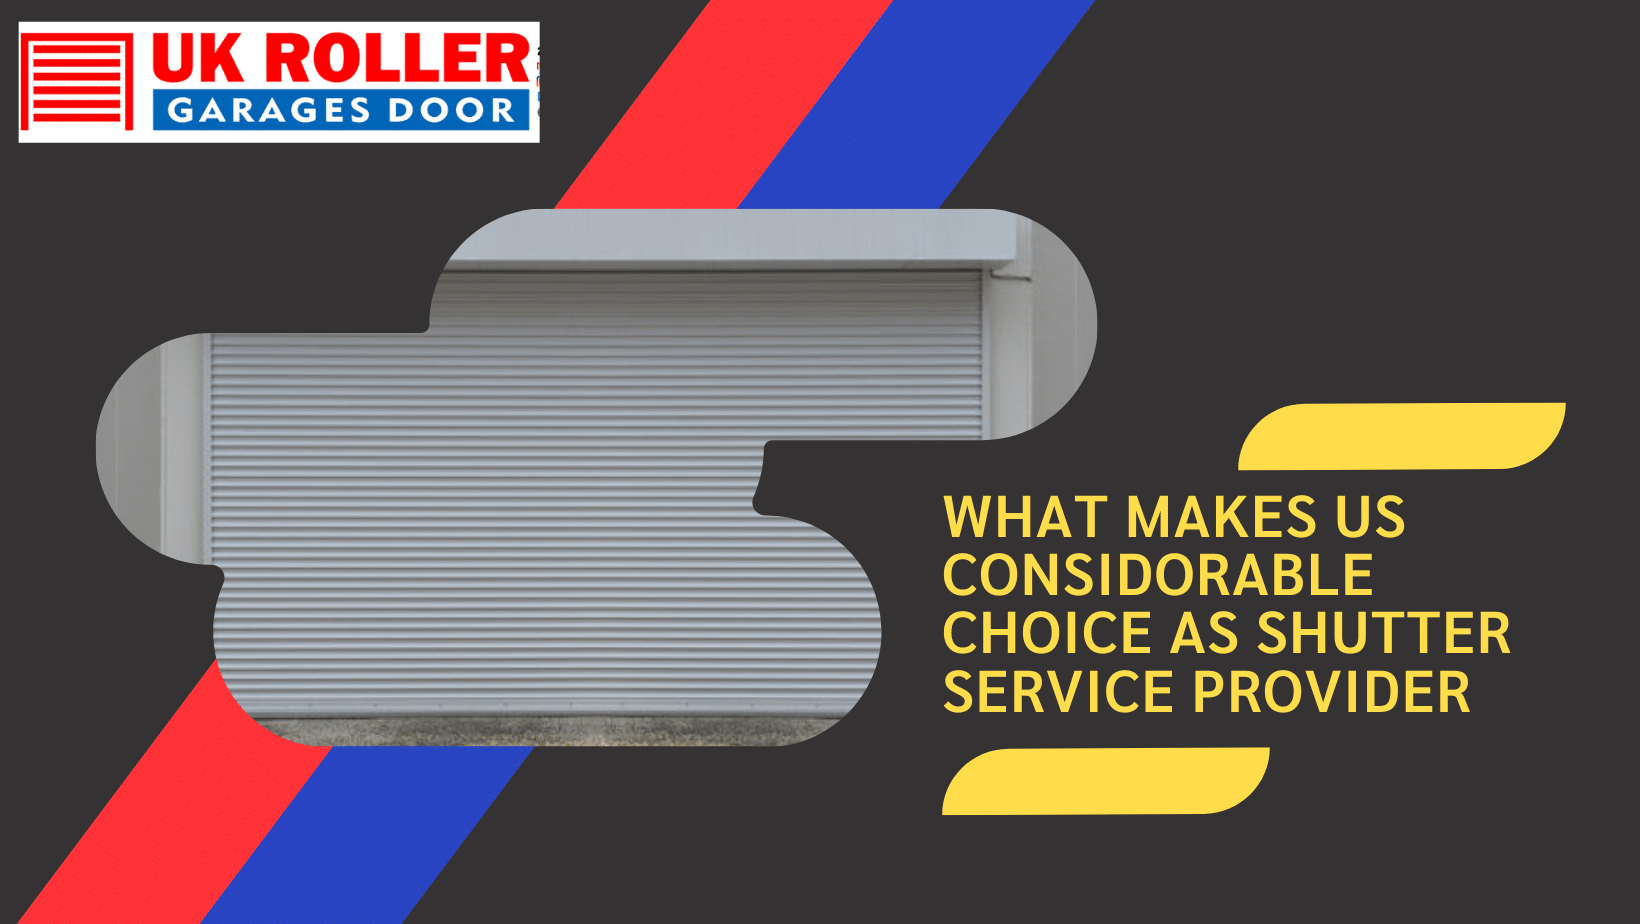 What Makes us Considorable Choice as Shutter Service Provider